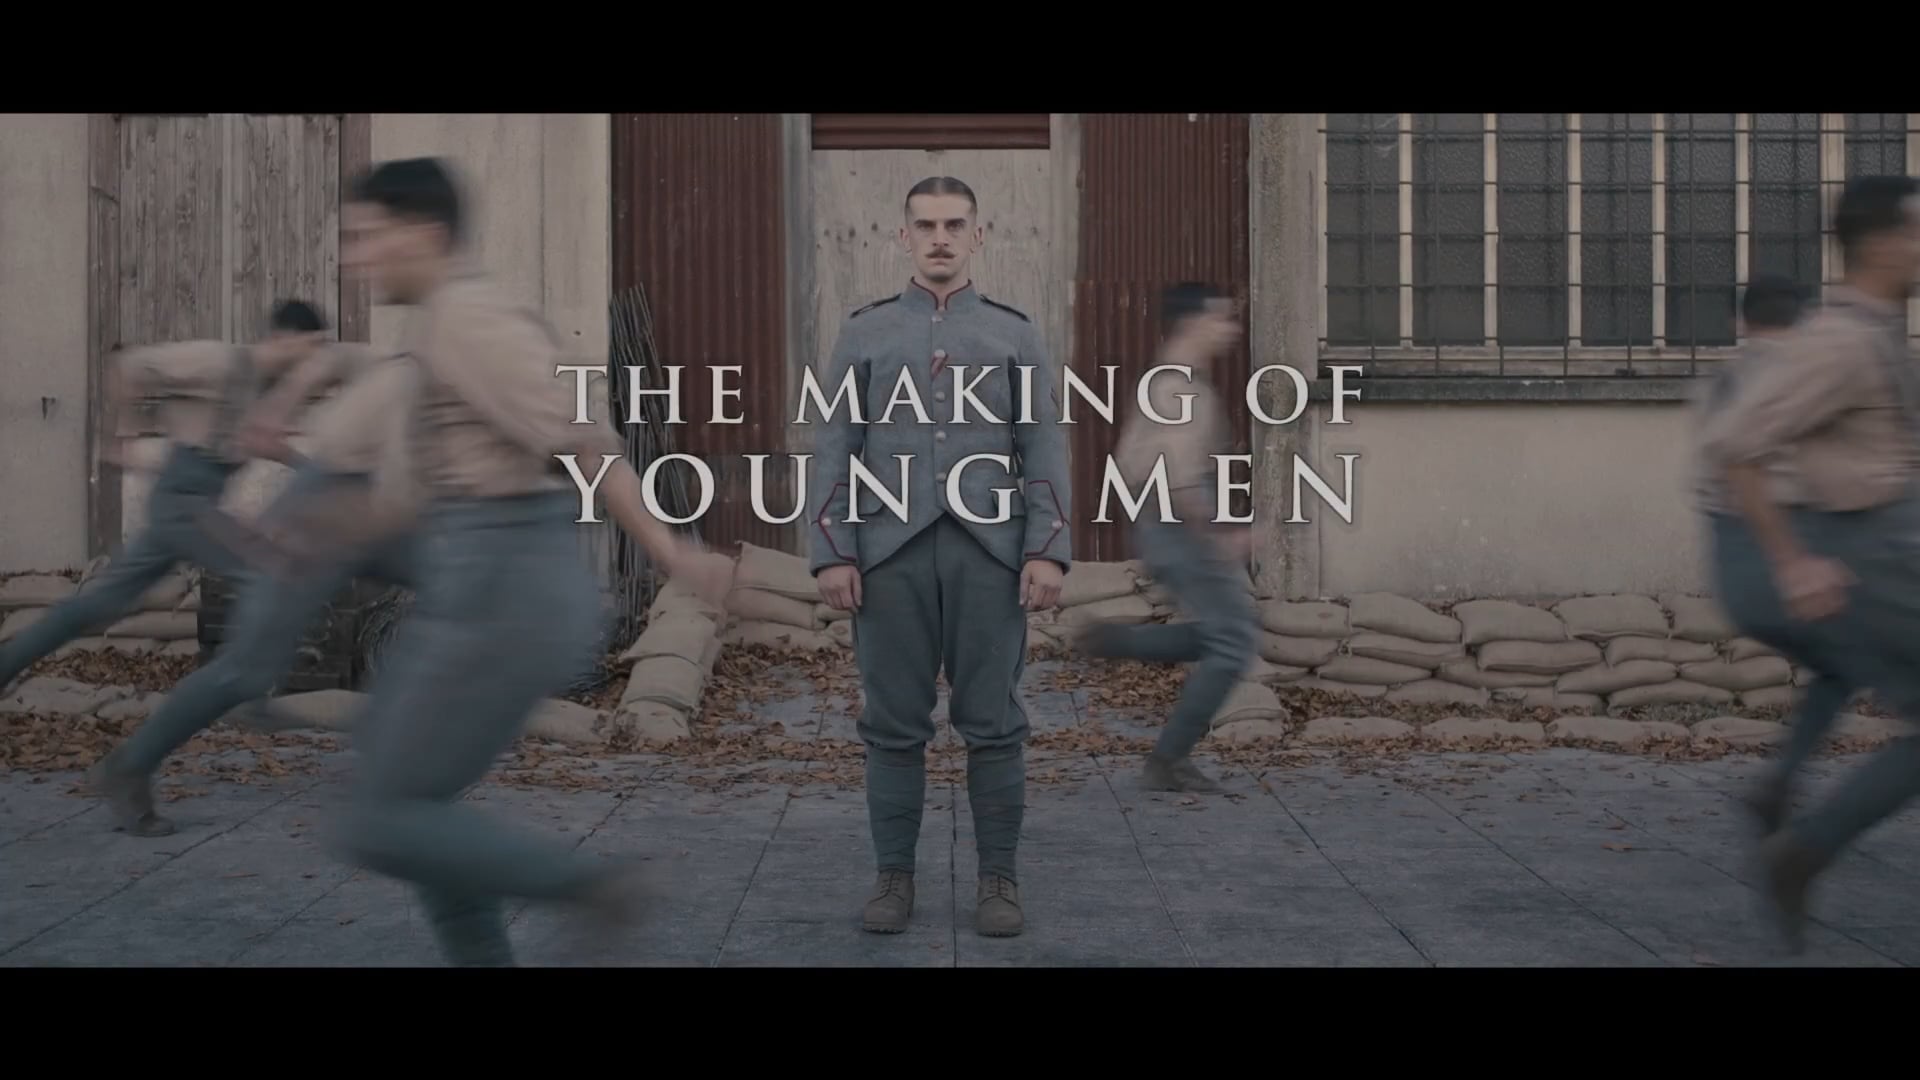 Watch The Making of Young Men DVD and Download Online Vimeo On Demand on Vimeo